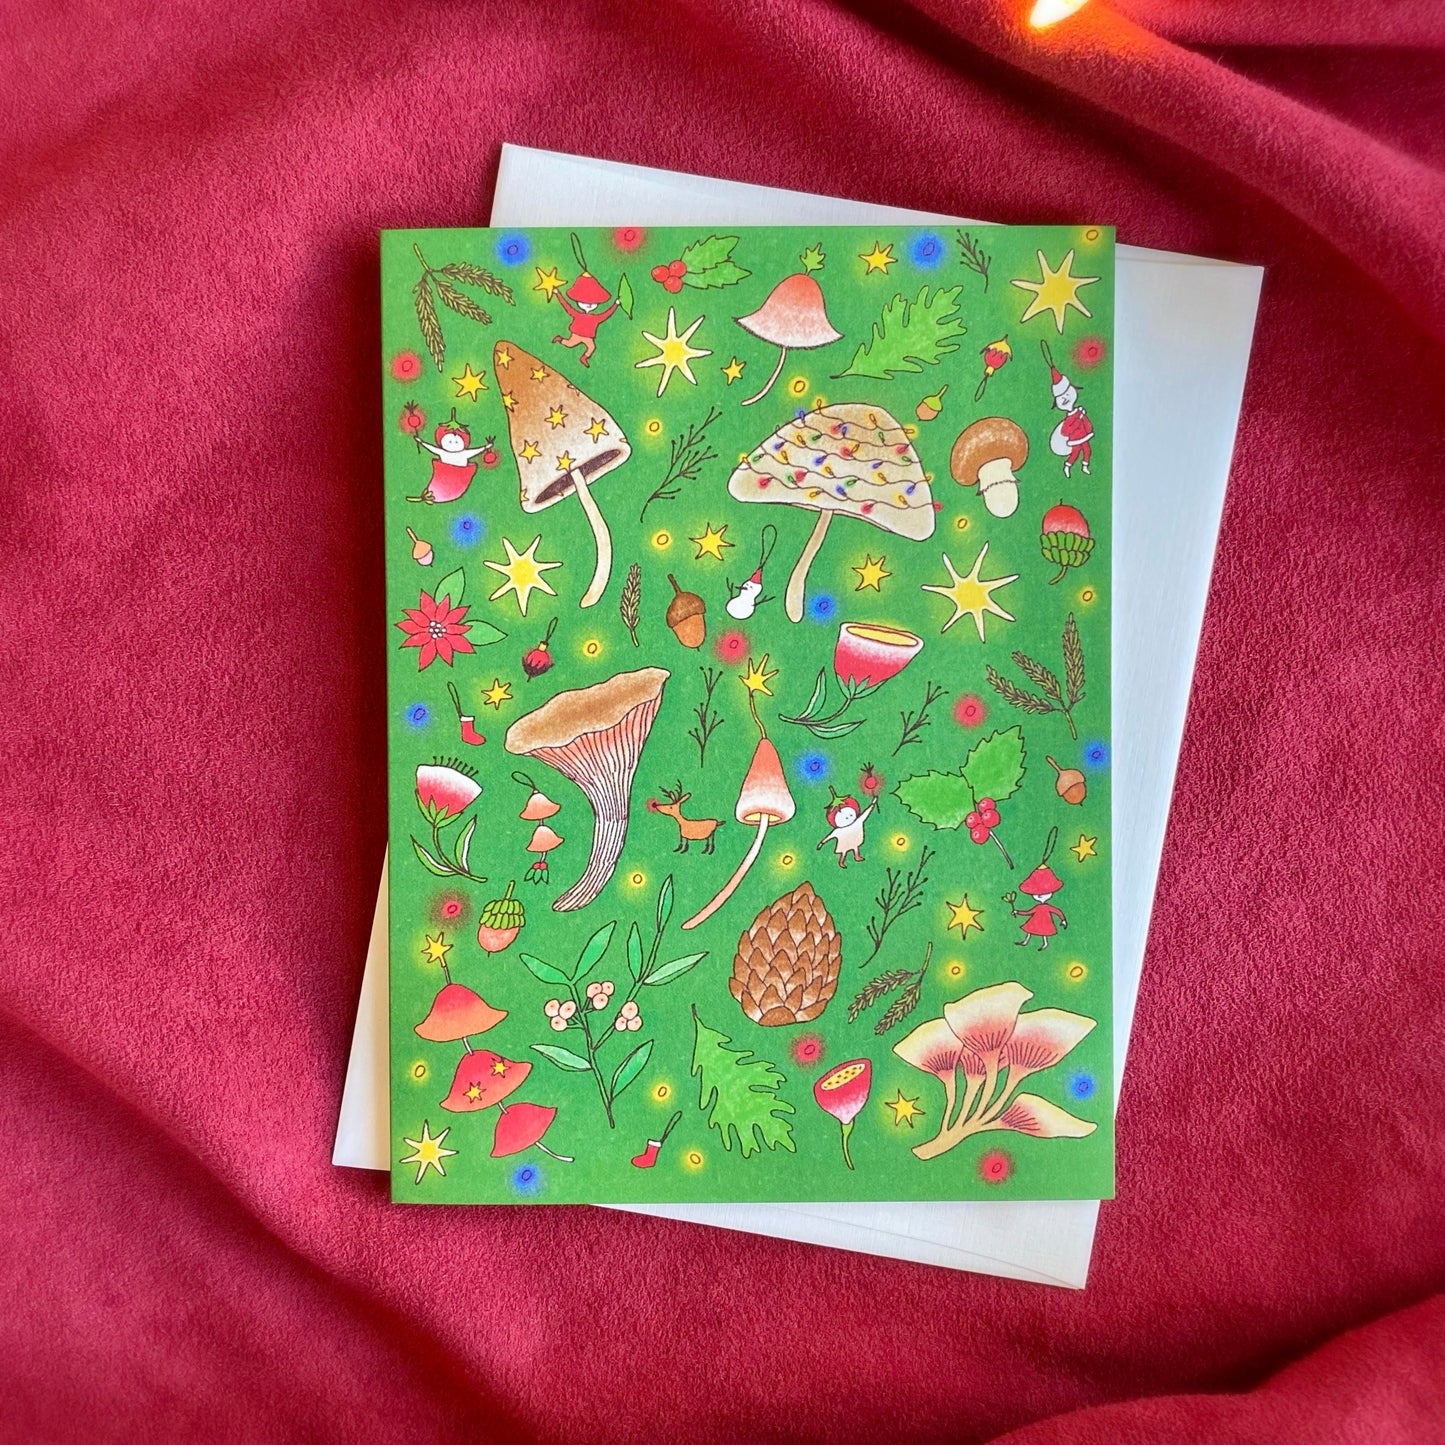 Unique Holiday Card Set with illustration of mushrooms and Christmas spirits, and winter plants